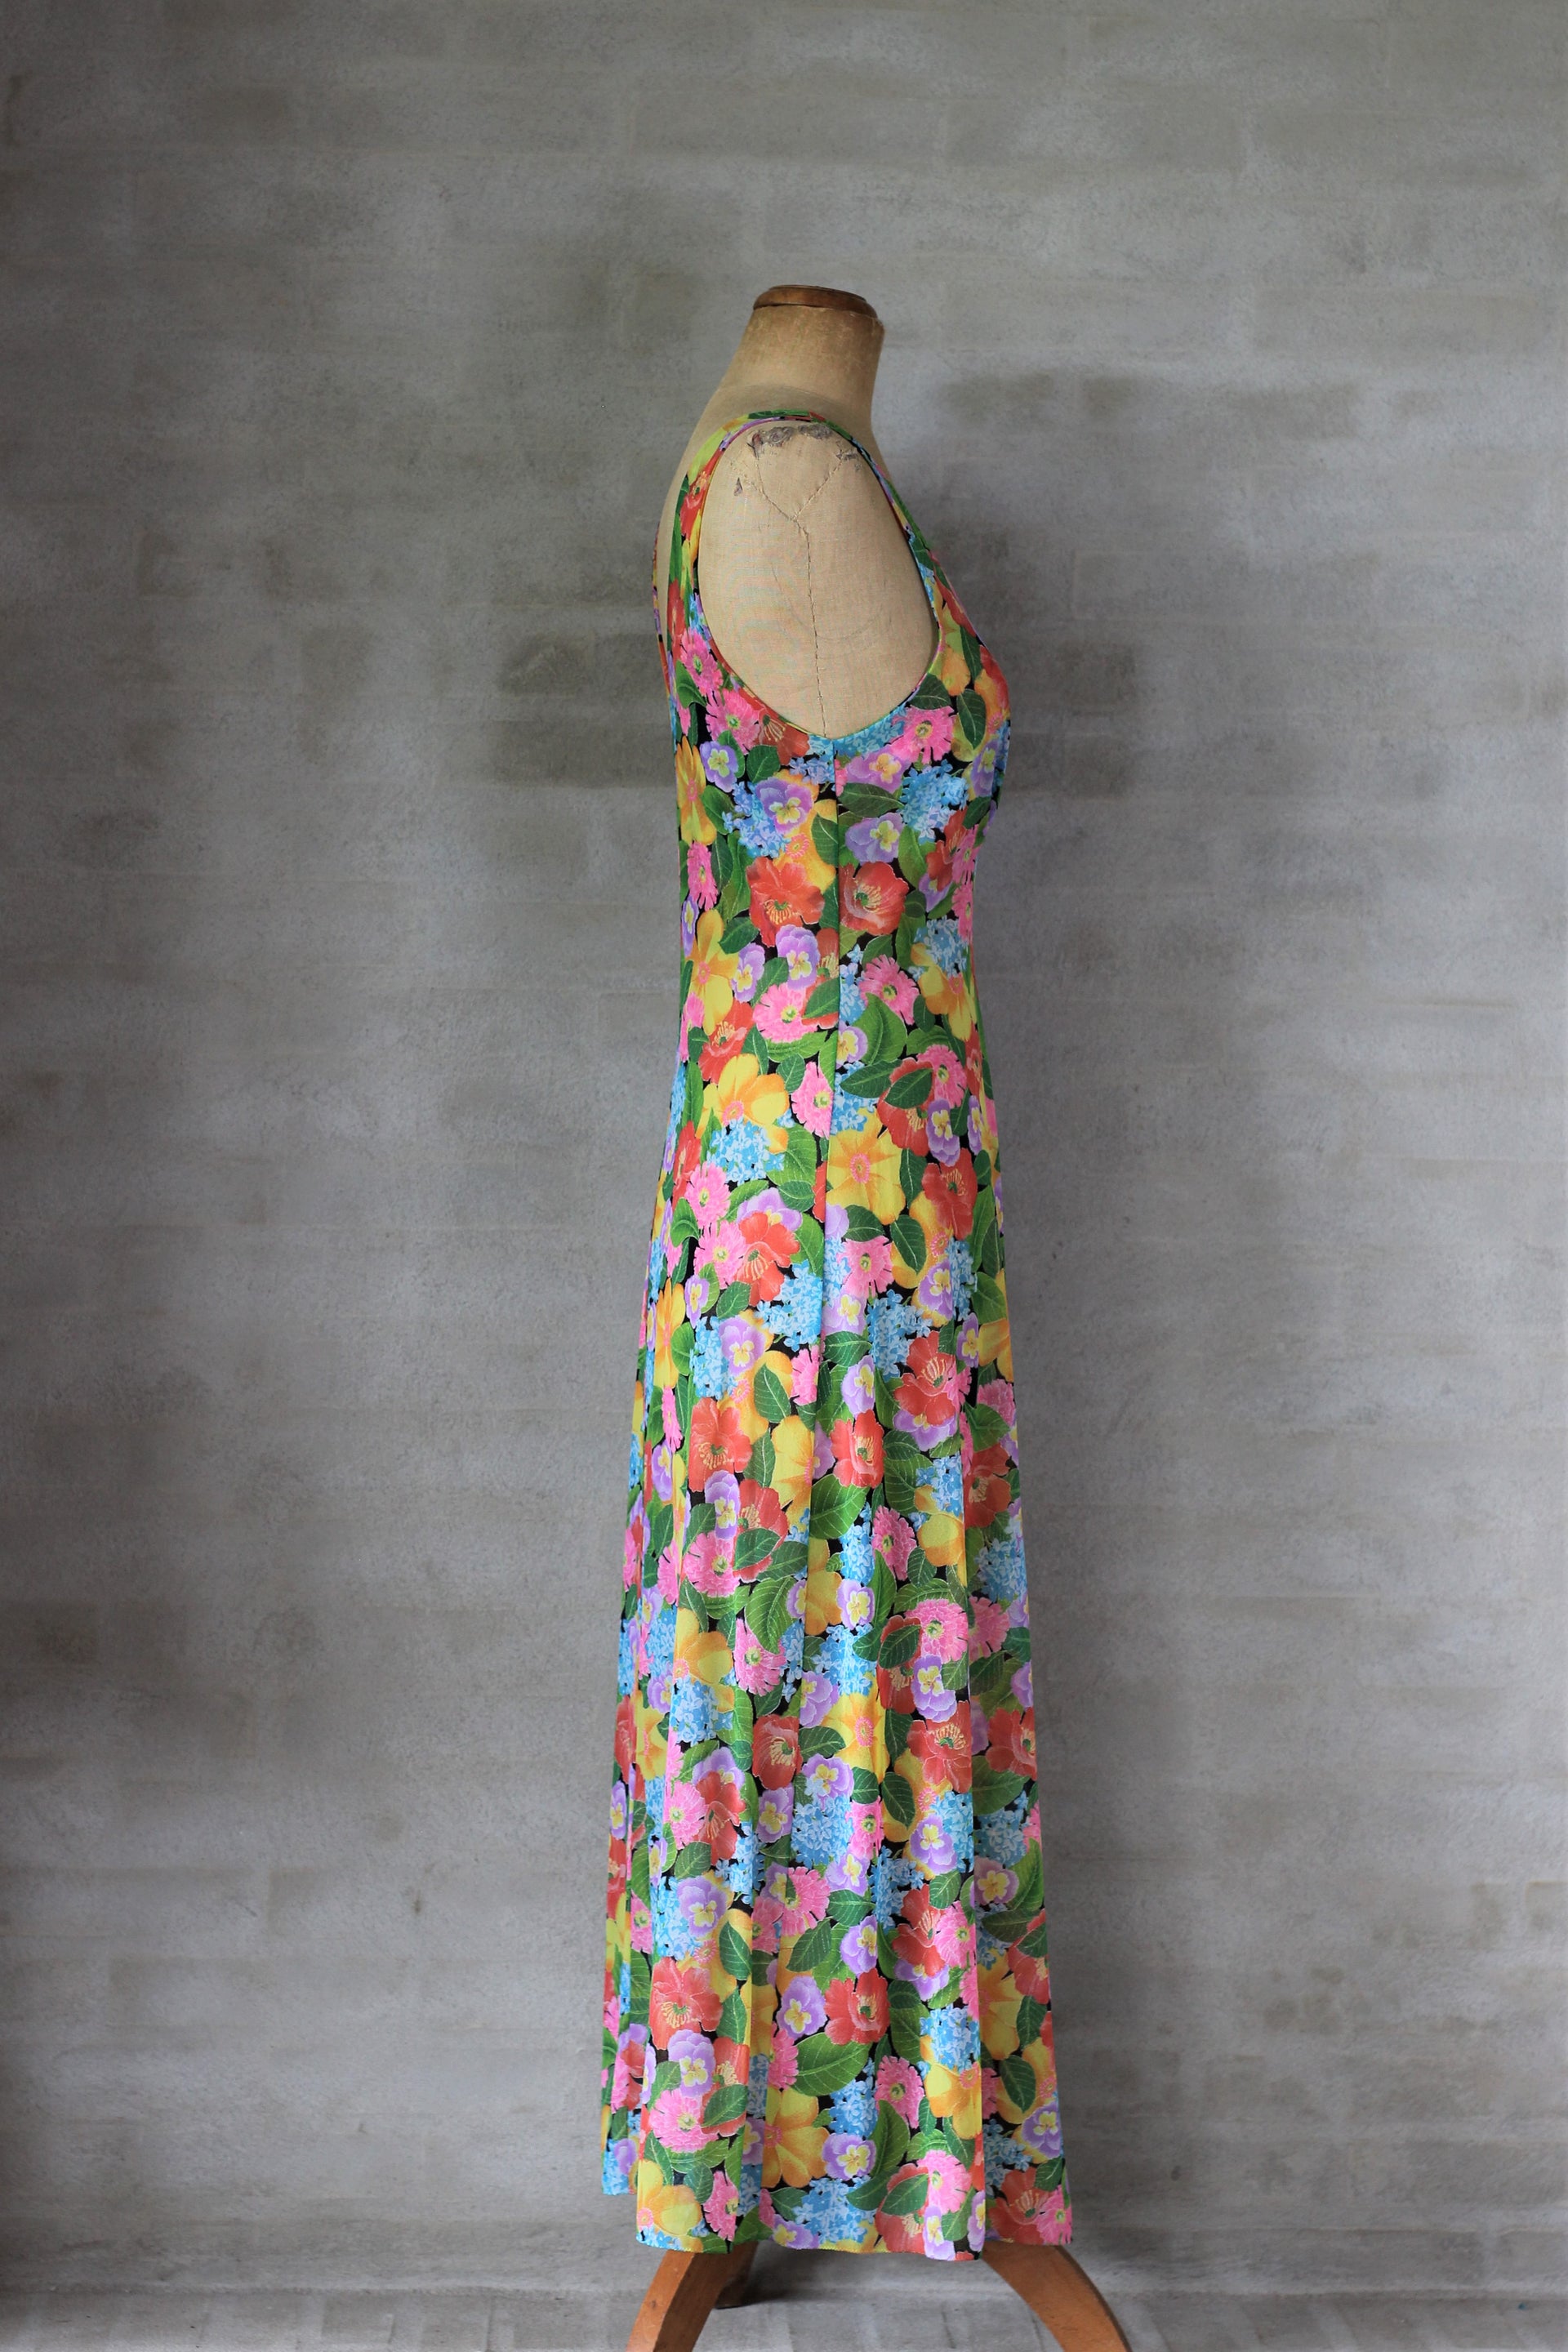 1990s Colorful Sheer Maxi Dress With Flowers//Size S/M            D5